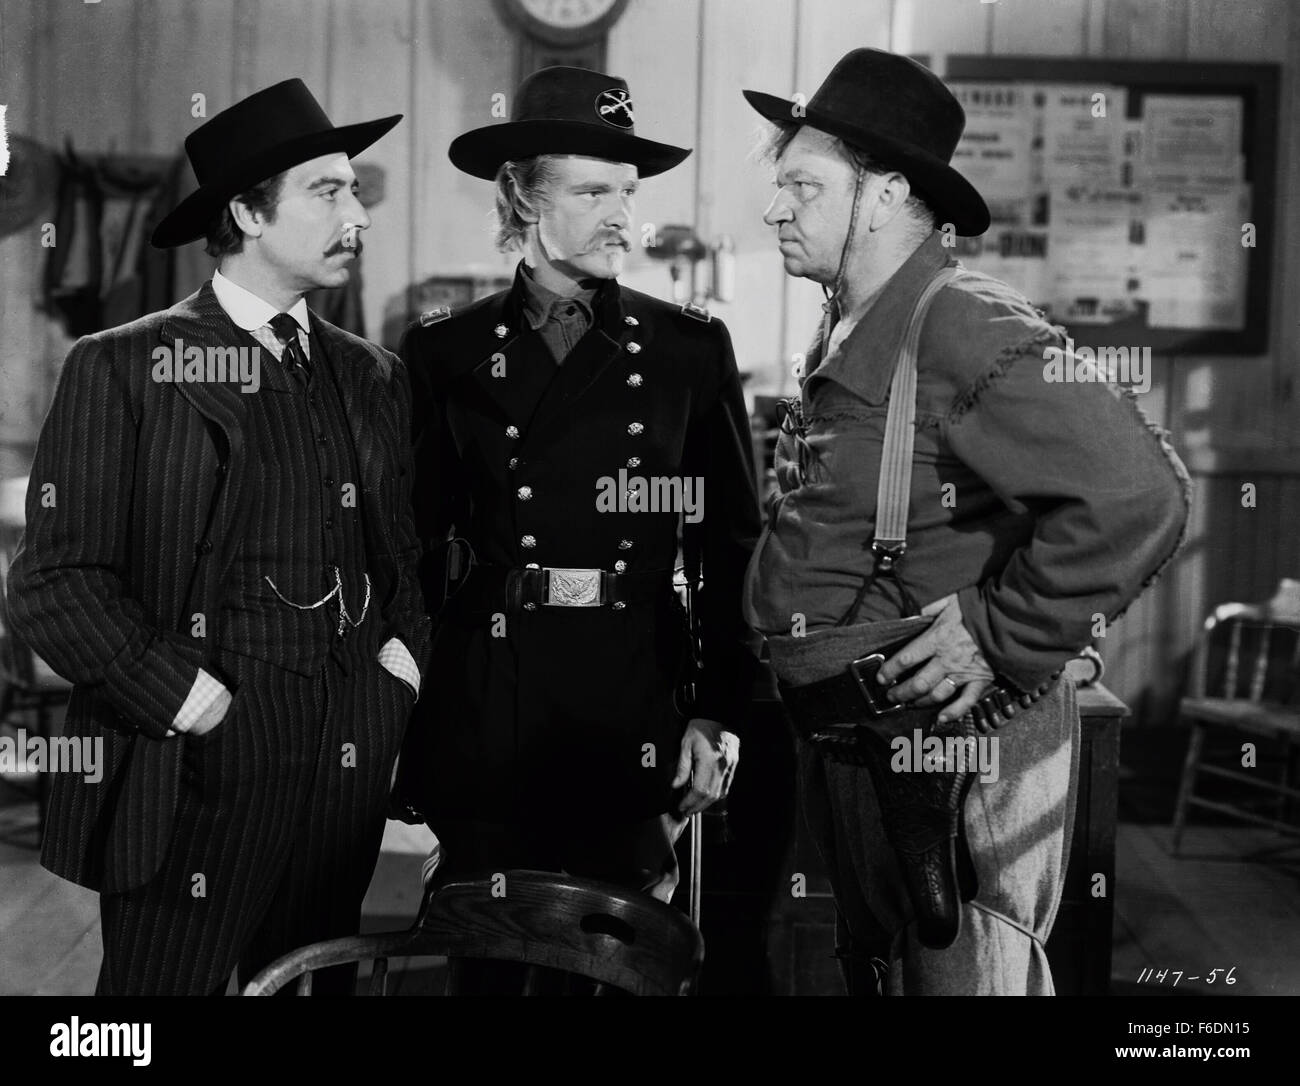 RELEASE DATE: September 13, 1940. MOVIE TITLE: Wyoming. STUDIO: Metro-Goldwyn-Mayer (MGM). PLOT: With the army after him and his partner deserting, Reb decides that a change of scenery would be nice so he heads for Wyoming with Dave. To show his gratitude to Dave, he steals his horse and gun, which causes Dave to be killed by cattle rustlers. While Reb is an outlaw and a teller of tall tales, he still feels responsible for the Kincaid Ranch and helps all the Ranchers battle Buckley, who wants to drive them all out. Even General Custer, with his 2 man cavalry gets involved in chasing Reb. PICTU Stock Photo